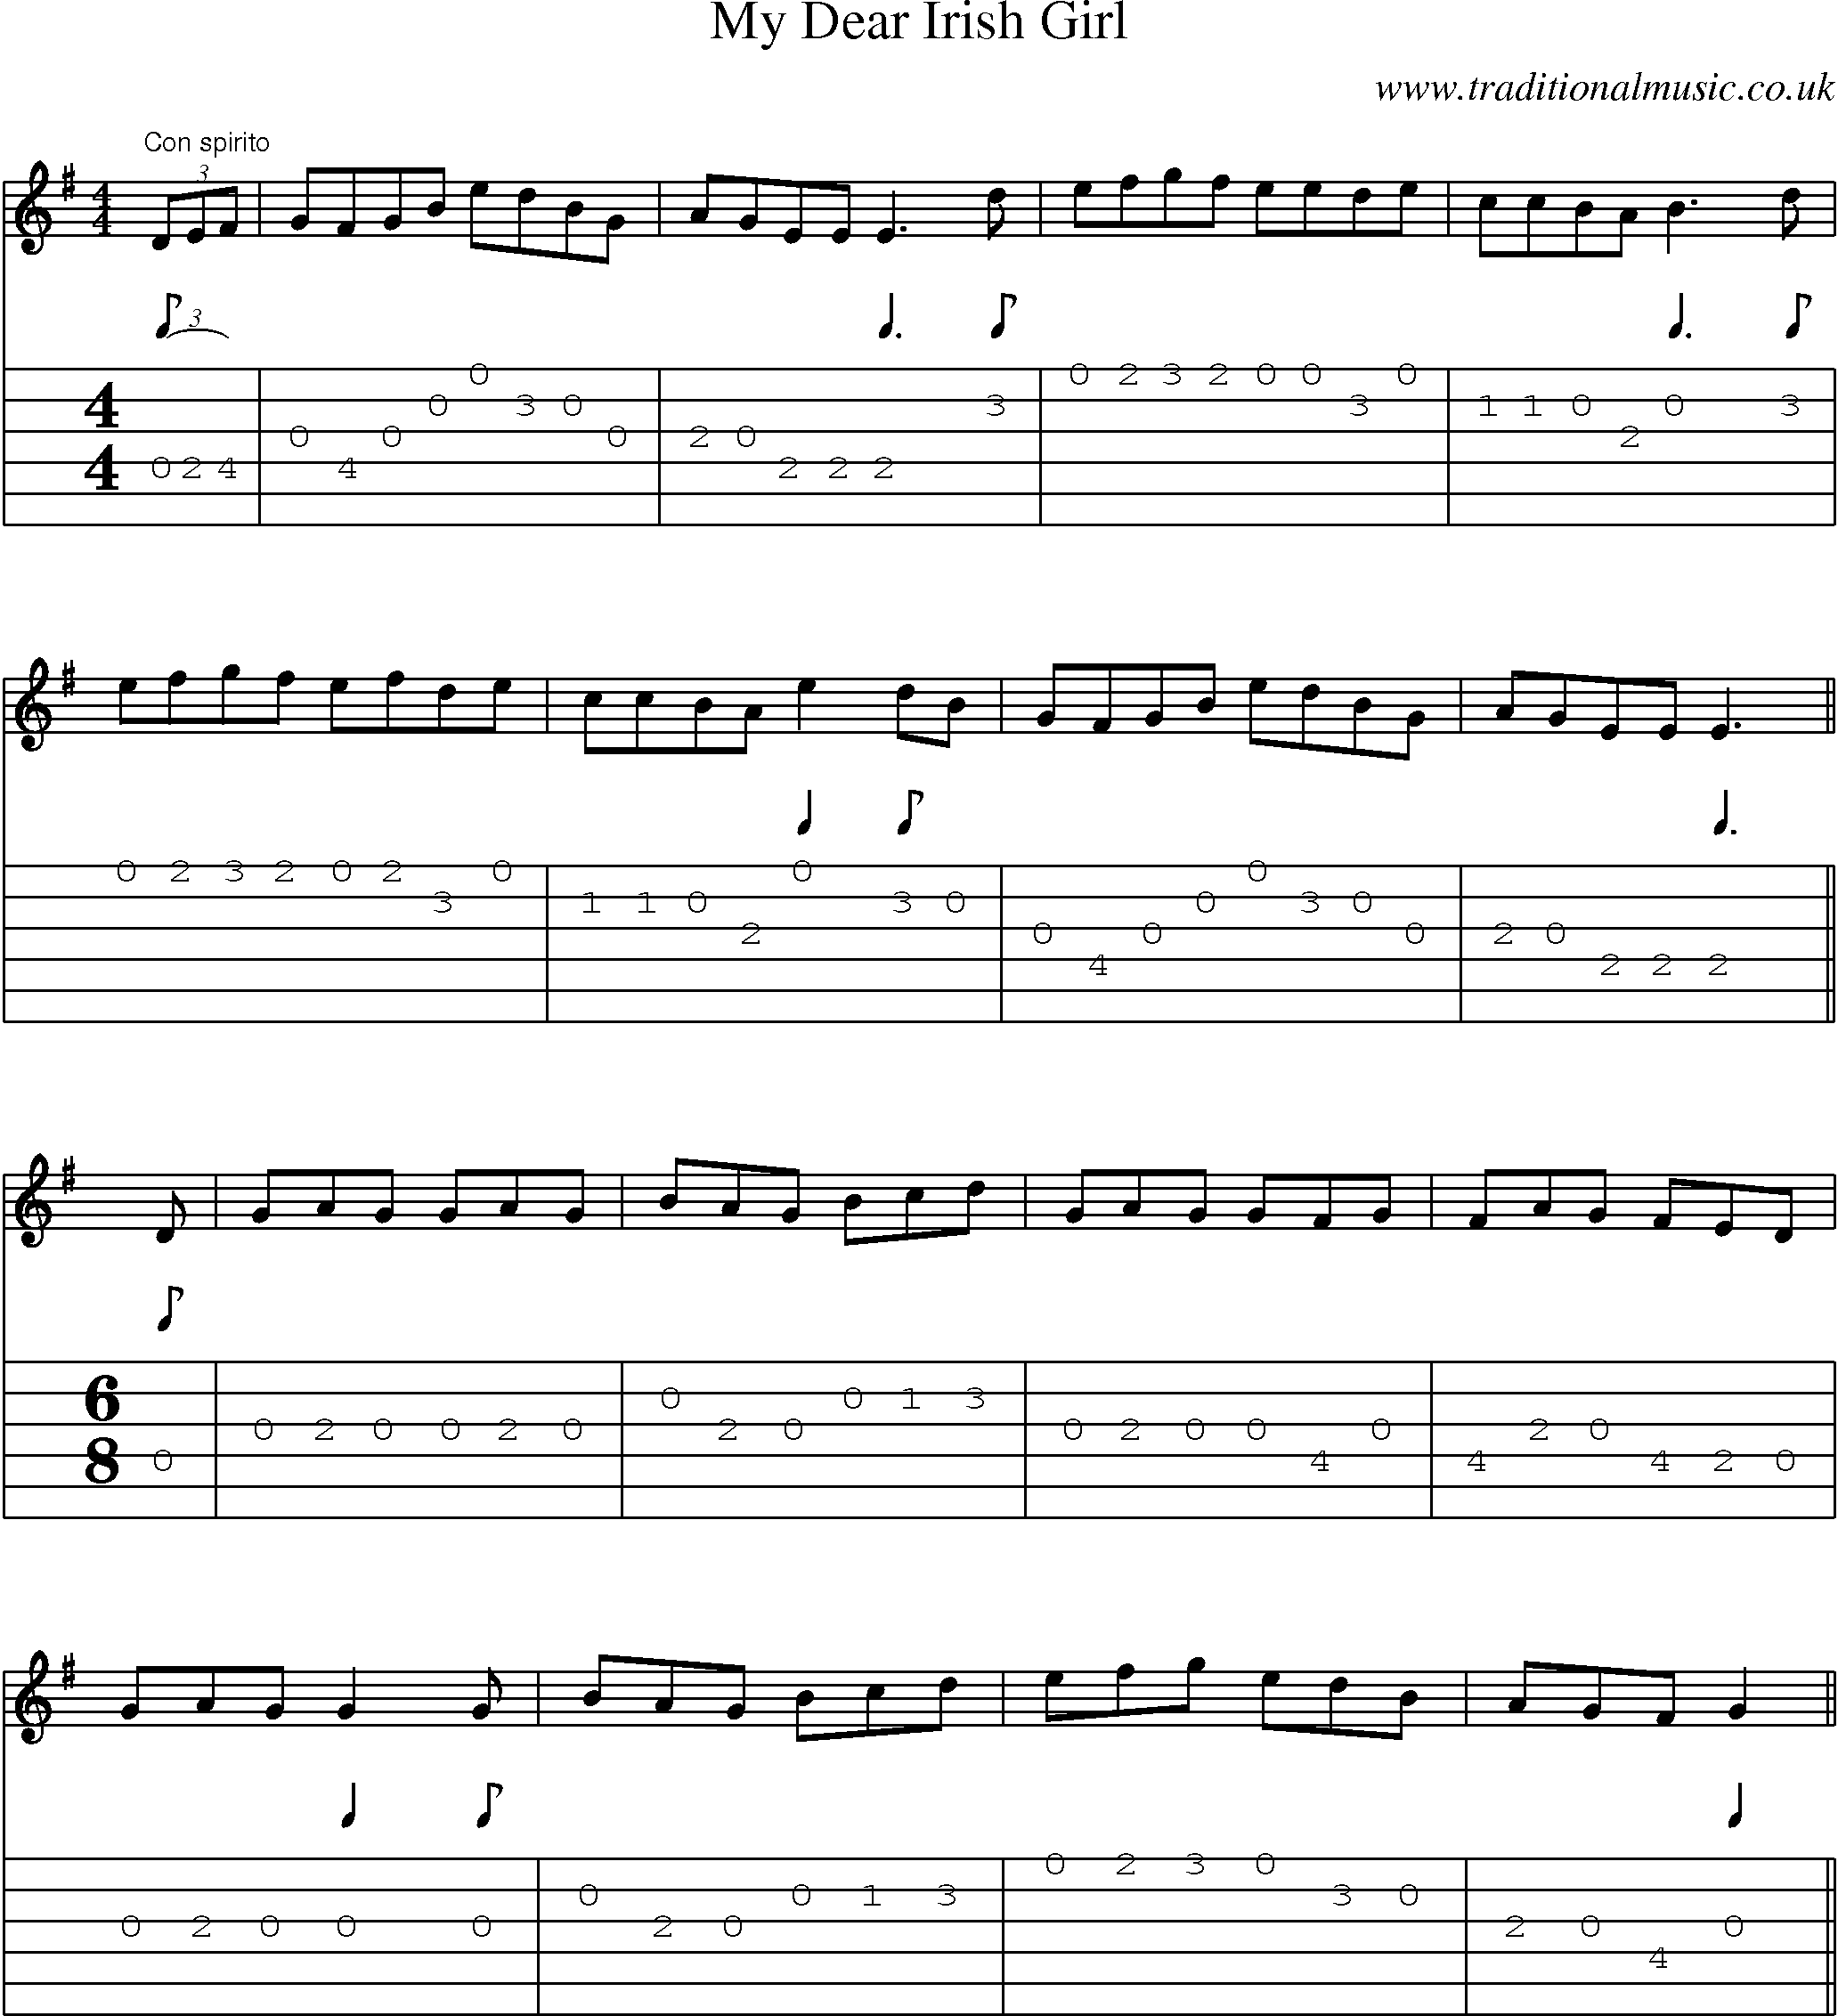 Music Score and Guitar Tabs for My Dear Irish Girl